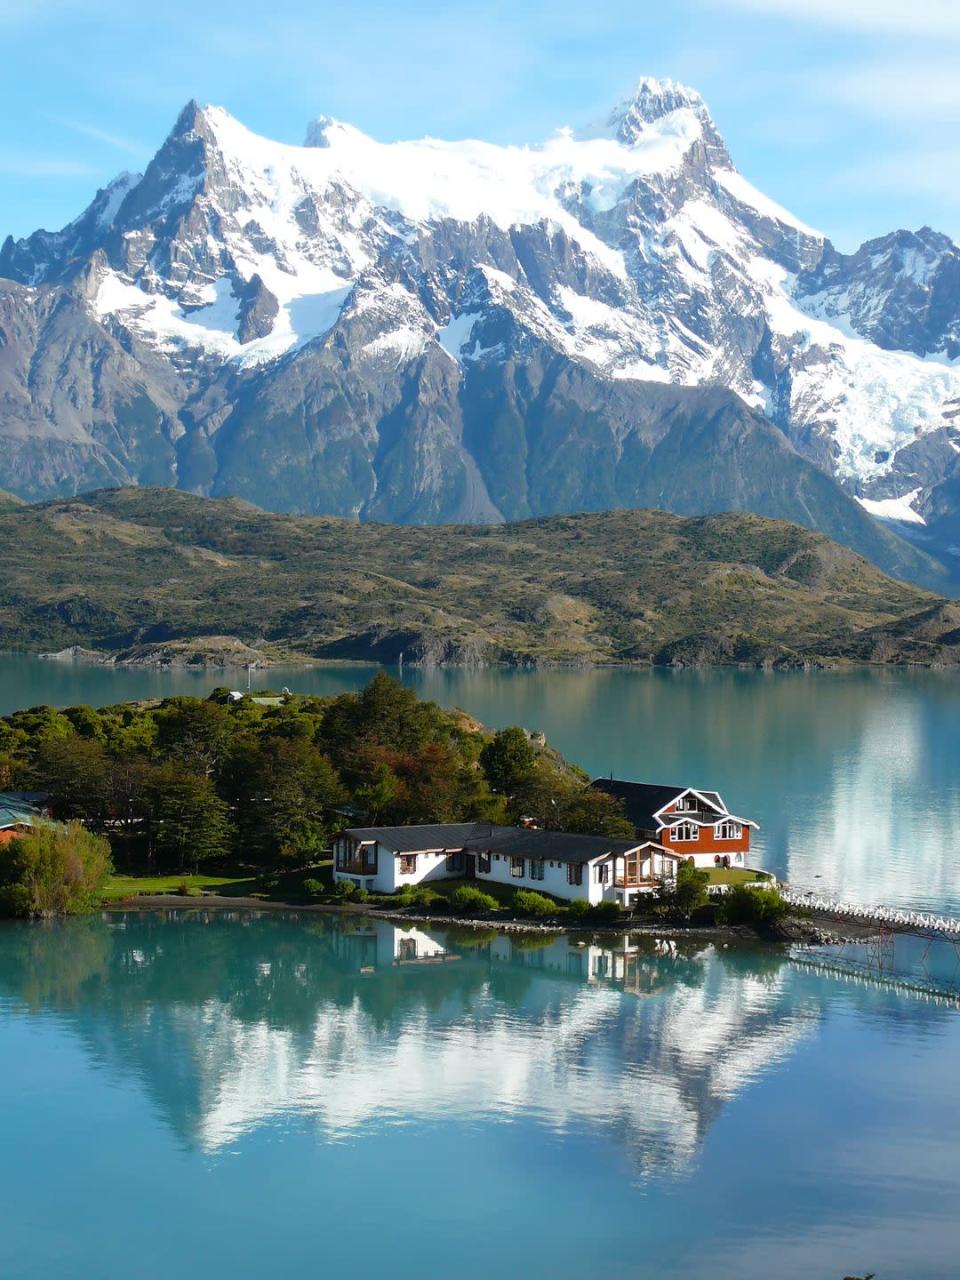 <p>On the Argentine side, you'll find steppes, grasslands, and deserts, while the Chilean side holds glacial fjords and a rainforest. Whether you ski, hike, or just want to behold the incredible beauty, boundless adventure awaits. It's home to several forms of rare wildlife, as well as iconic sites like Cuernos del Paine.</p><p><a class="link rapid-noclick-resp" href="https://go.redirectingat.com?id=74968X1596630&url=https%3A%2F%2Fwww.tripadvisor.com%2FTourism-g294276-Patagonia-Vacations.html&sref=https%3A%2F%2Fwww.housebeautiful.com%2Flifestyle%2Fg4500%2Fmost-beautiful-places-world%2F" rel="nofollow noopener" target="_blank" data-ylk="slk:LEARN MORE">LEARN MORE</a></p>